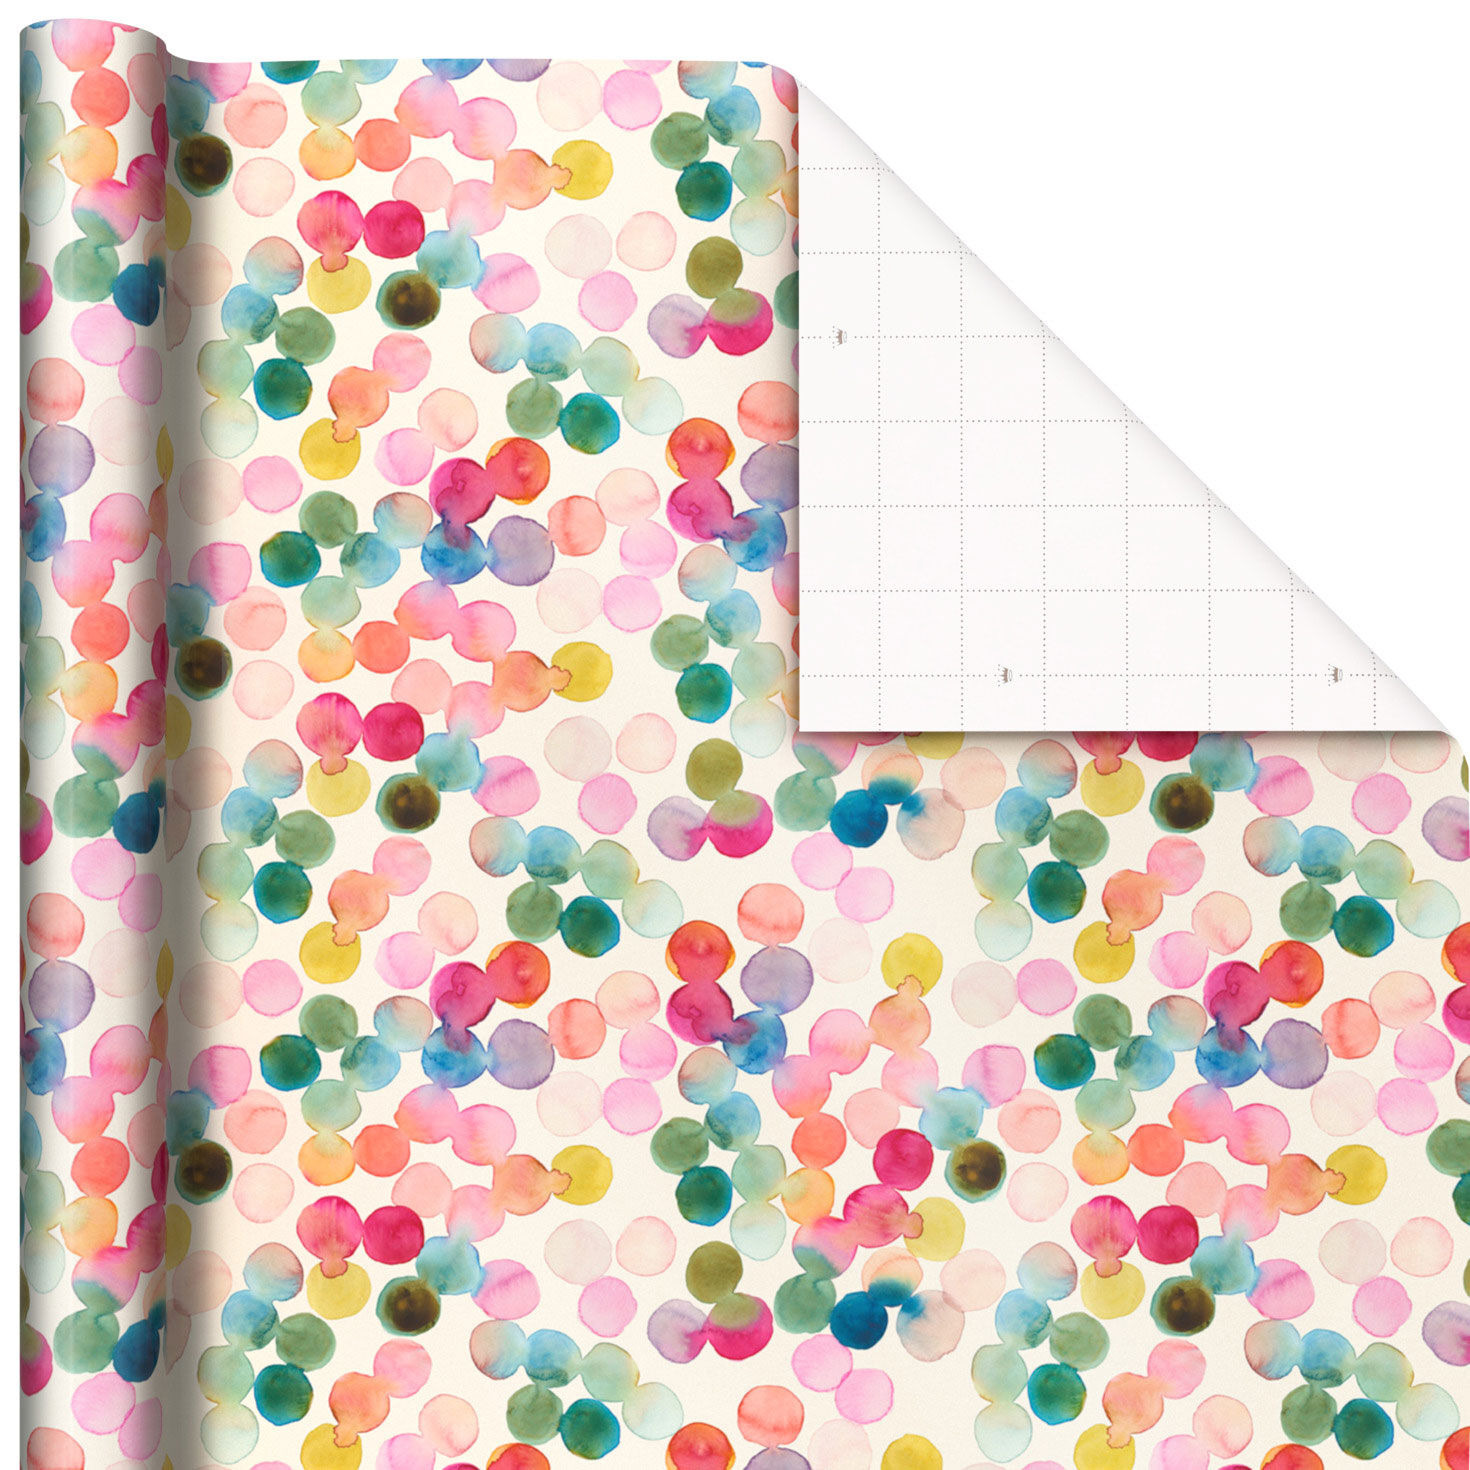 Sweet and Light Wrapping Paper Collection - Wrapping Paper Sets